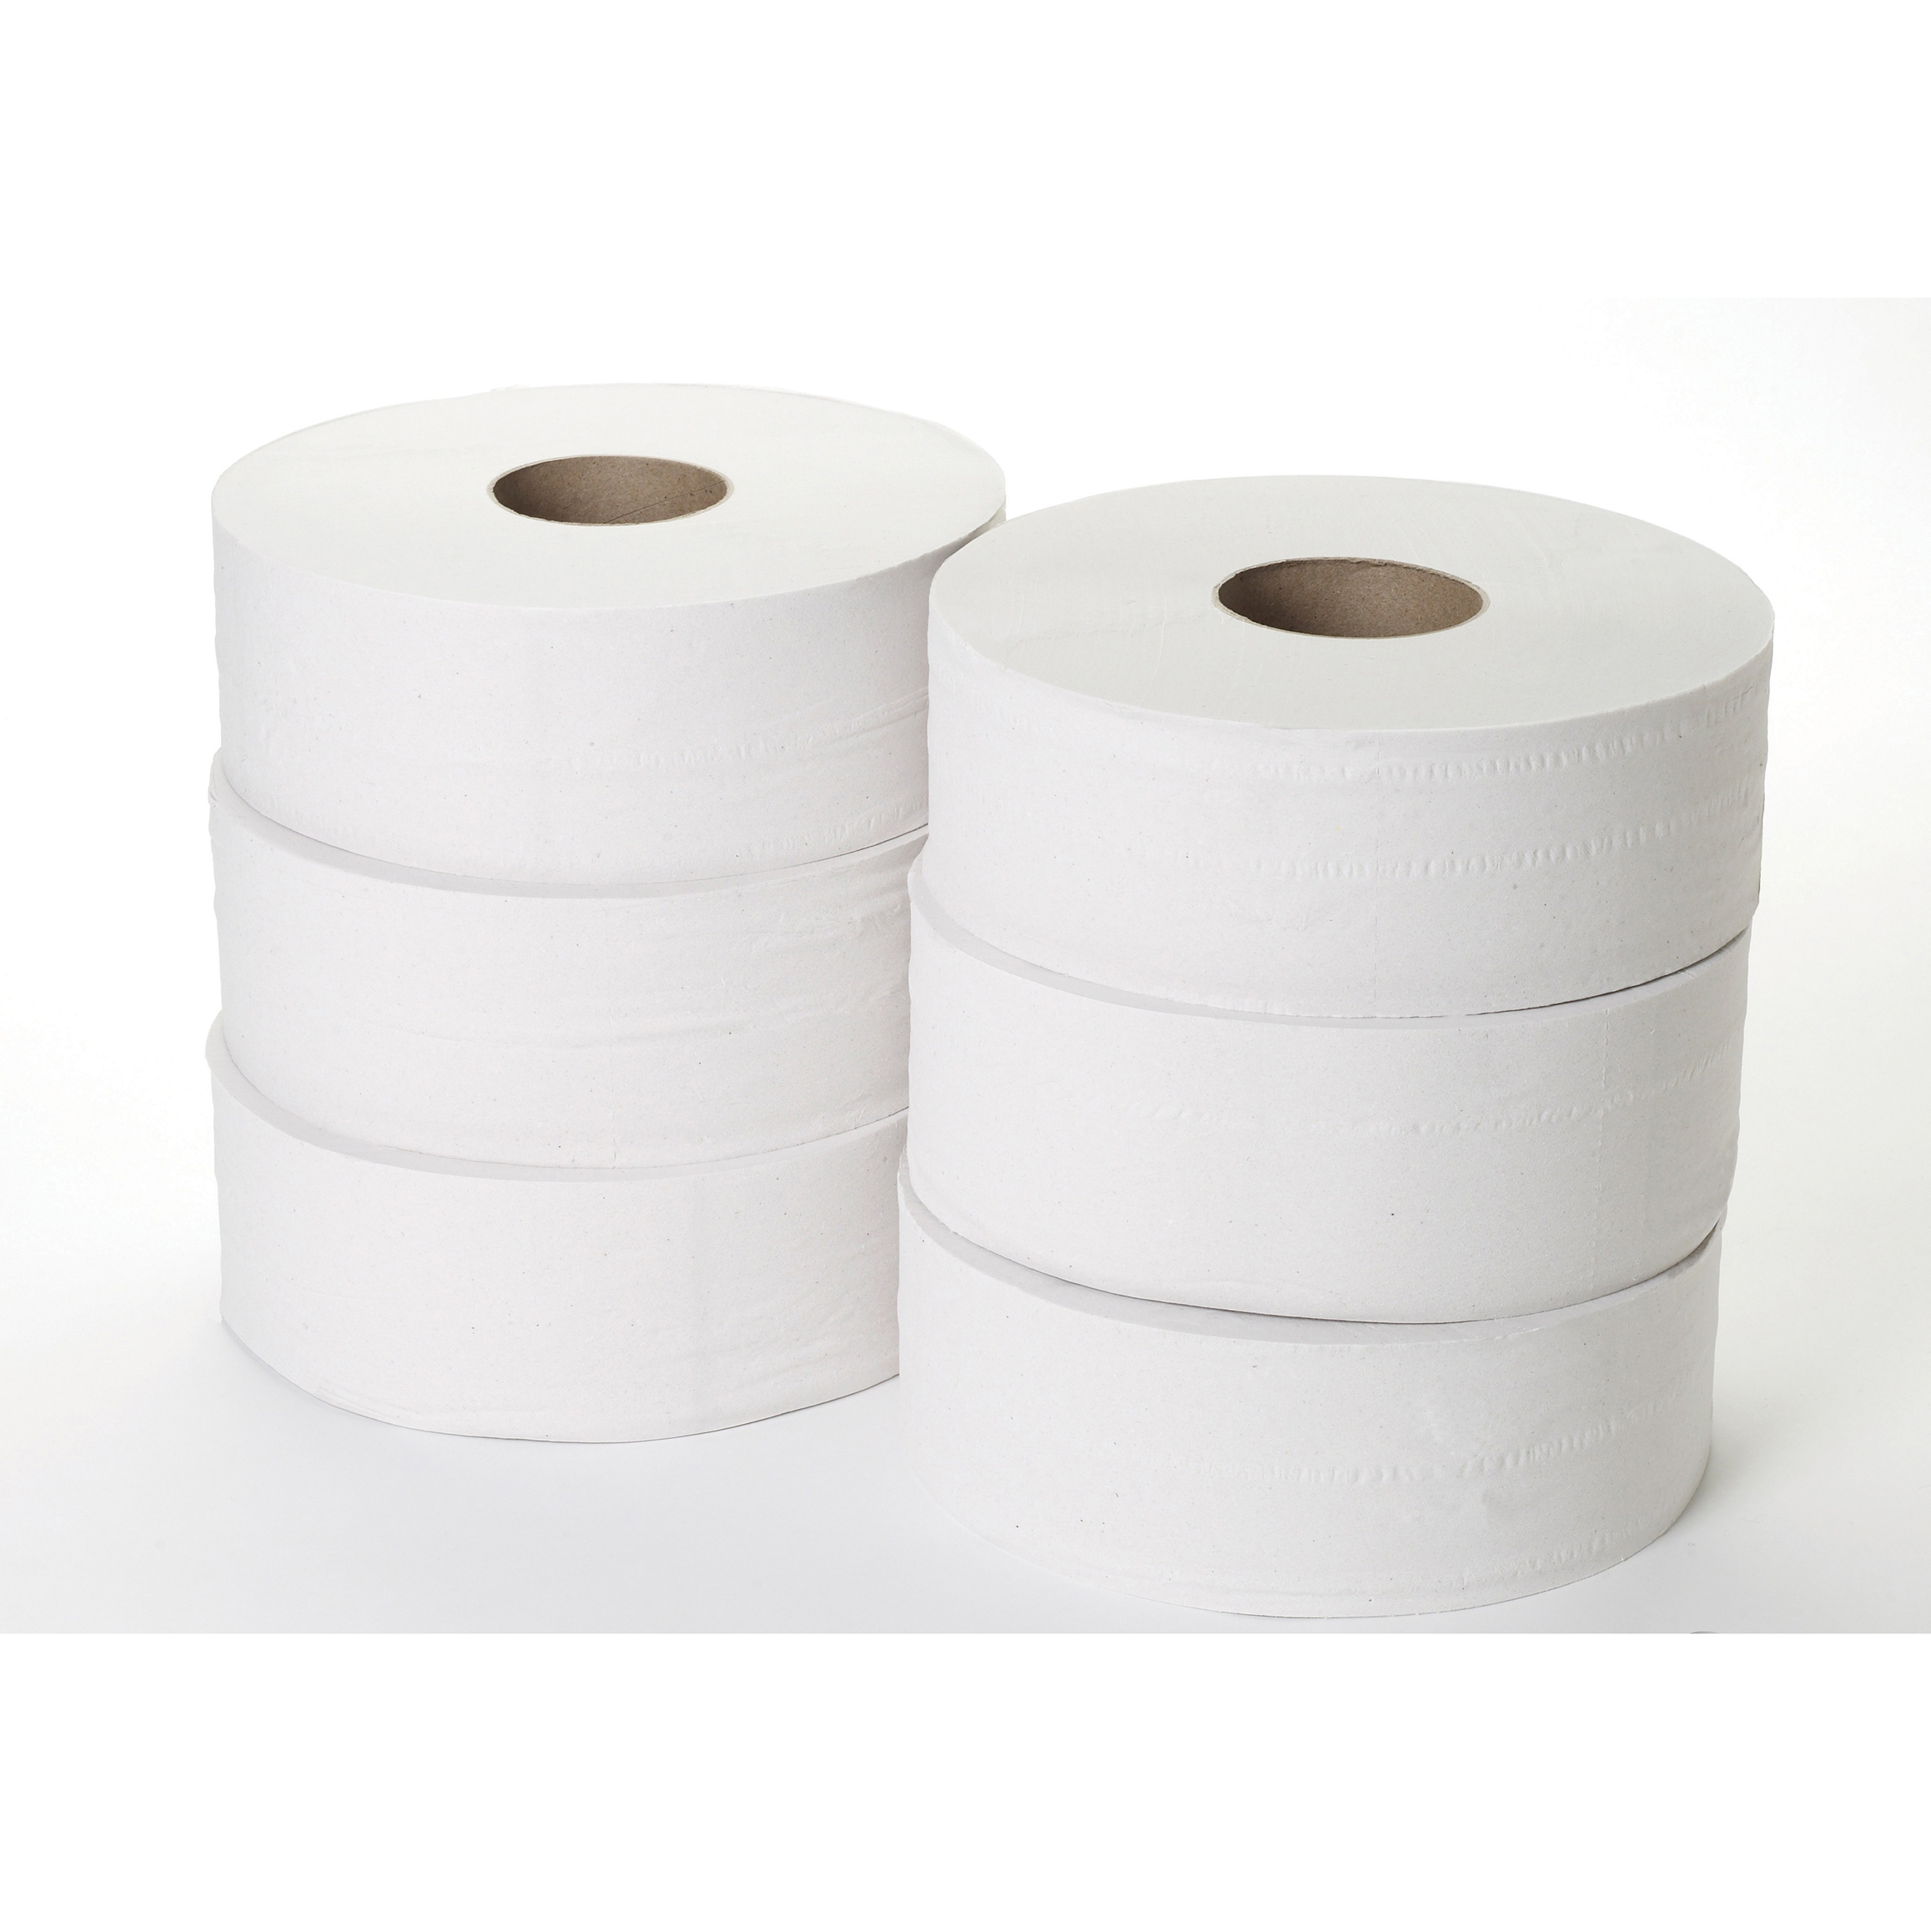 2 Ply Mini Jumbo Toilet Roll 150M x 86mm x 60mm 416 Sheets First Safety